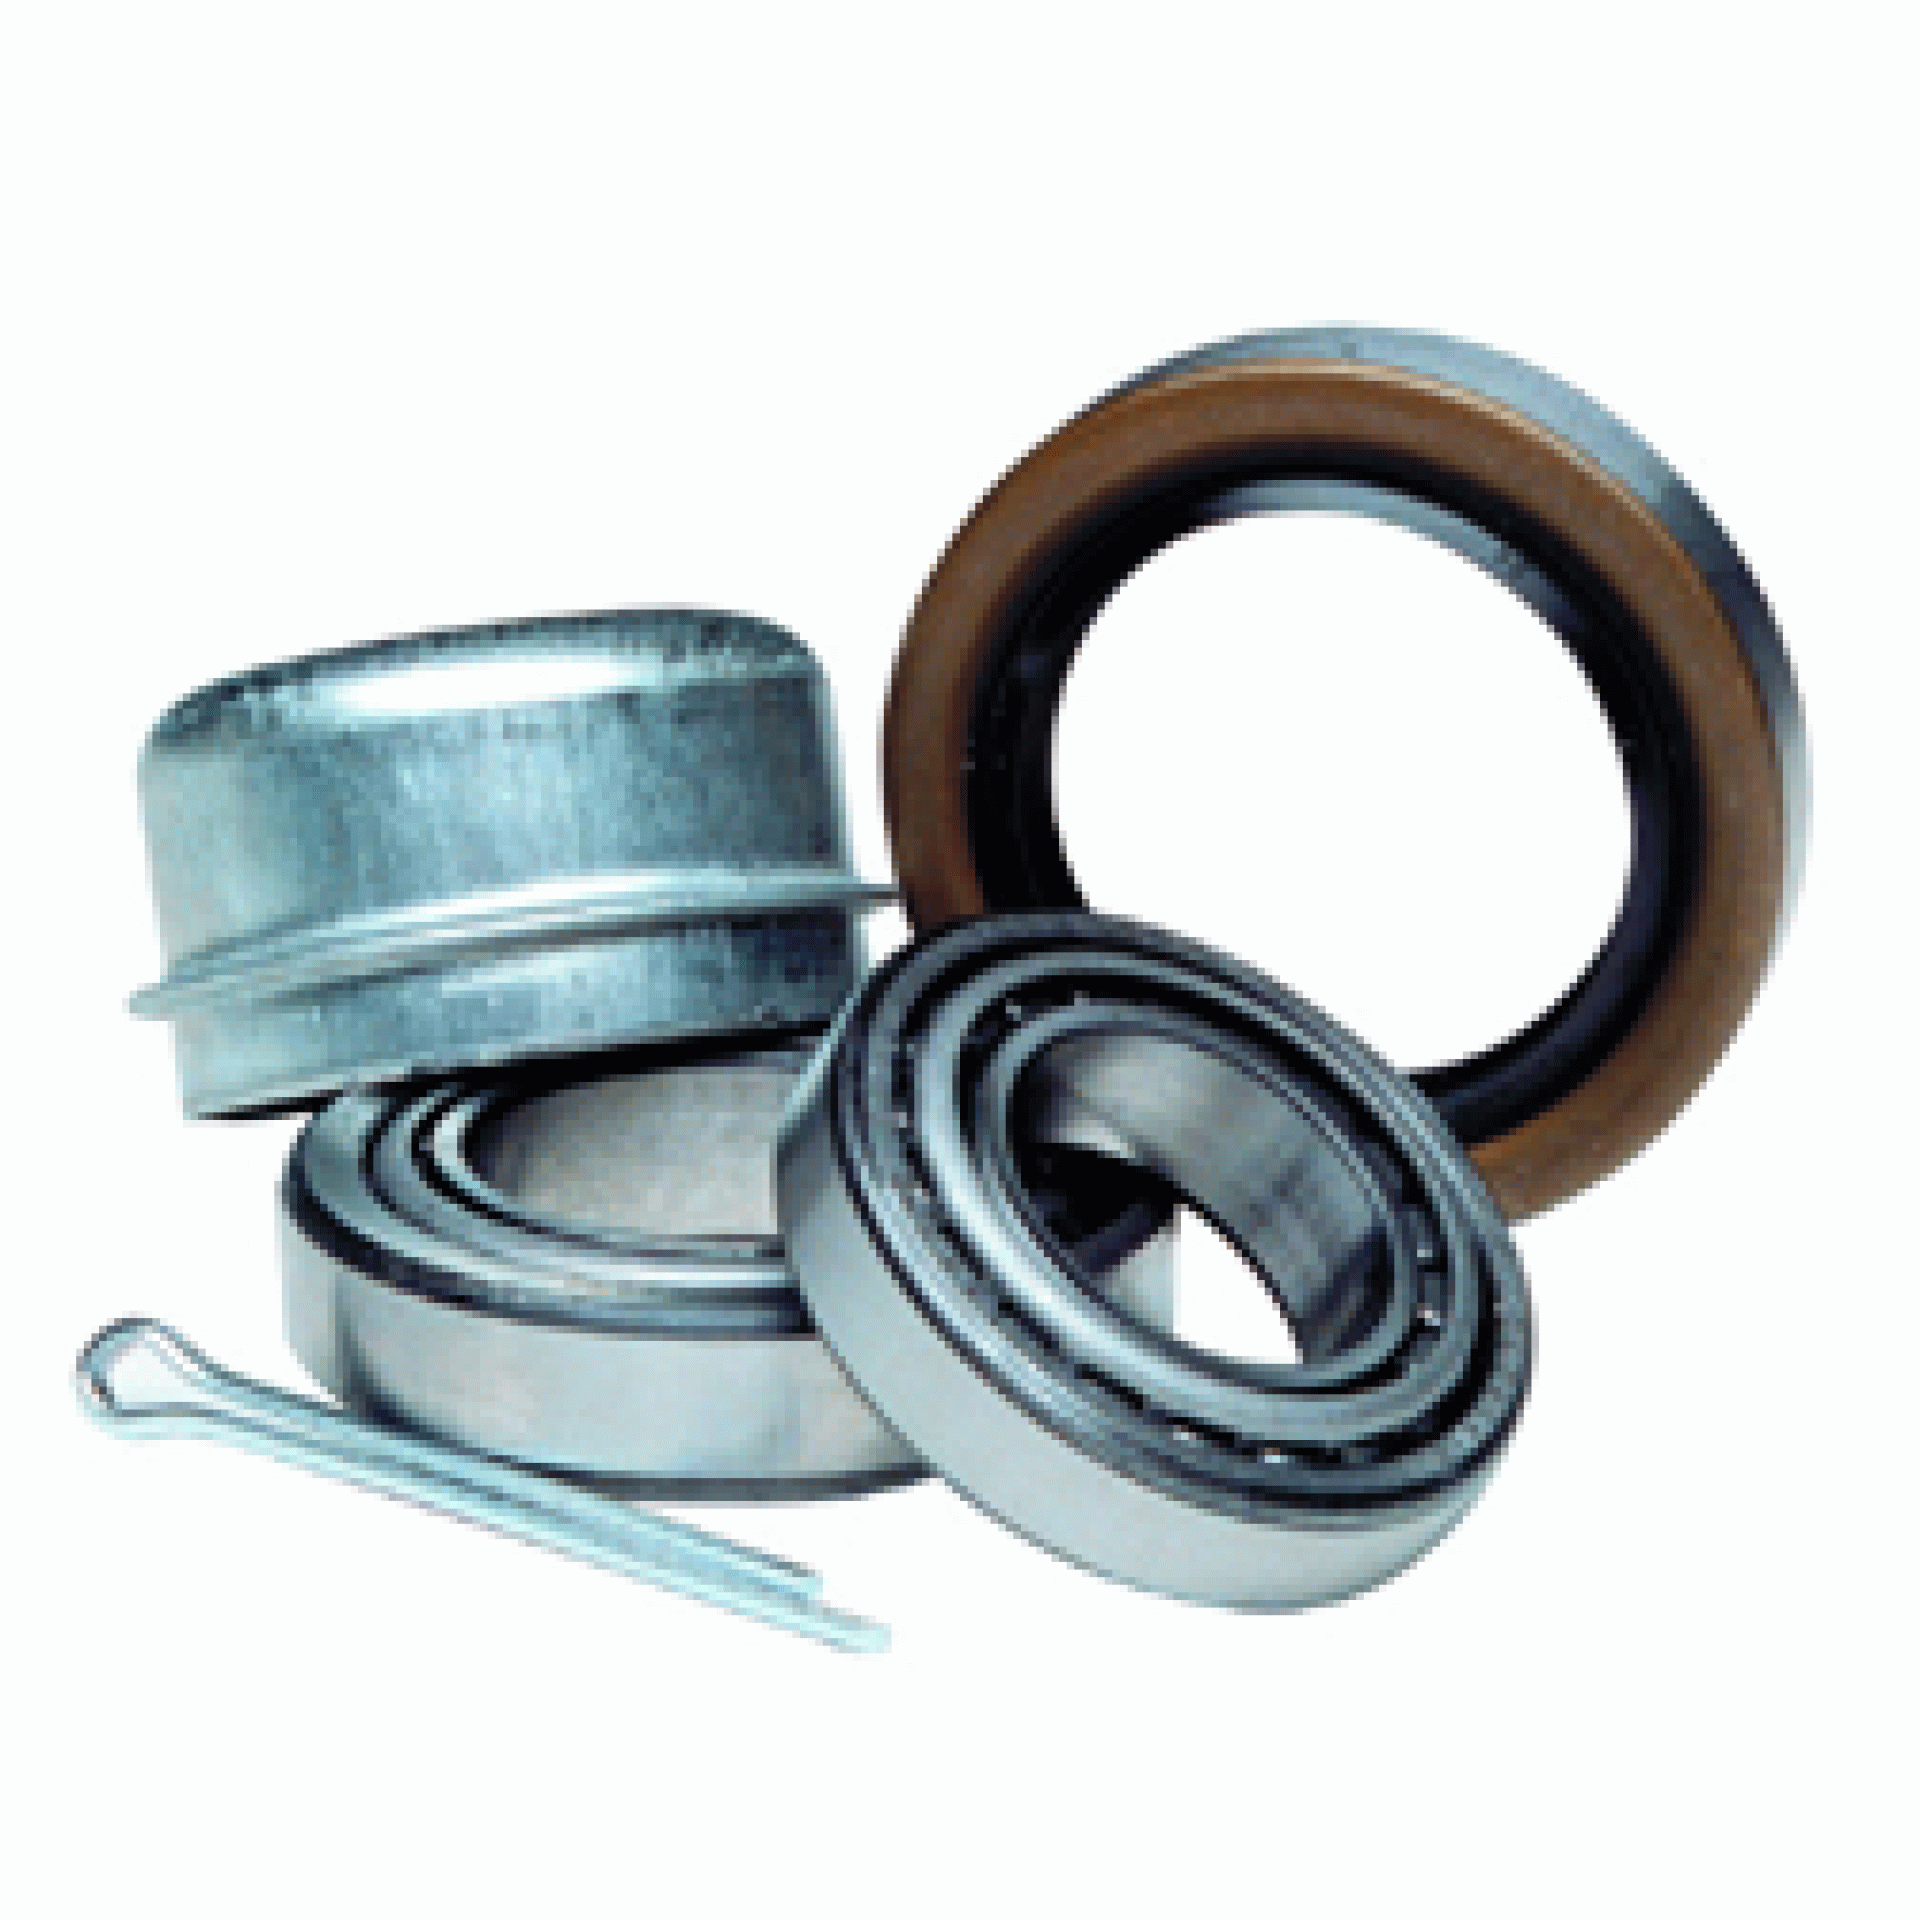 DEXTER MARINE PRODUCTS OF GEORGIA LC | K71-G02-21 | BEARING KIT- 1-1/16" X 3/4" TAPERED SPINDLE WITH DUST CAP LM11949 & L44649 CONE LM11910 & L44610 CUP